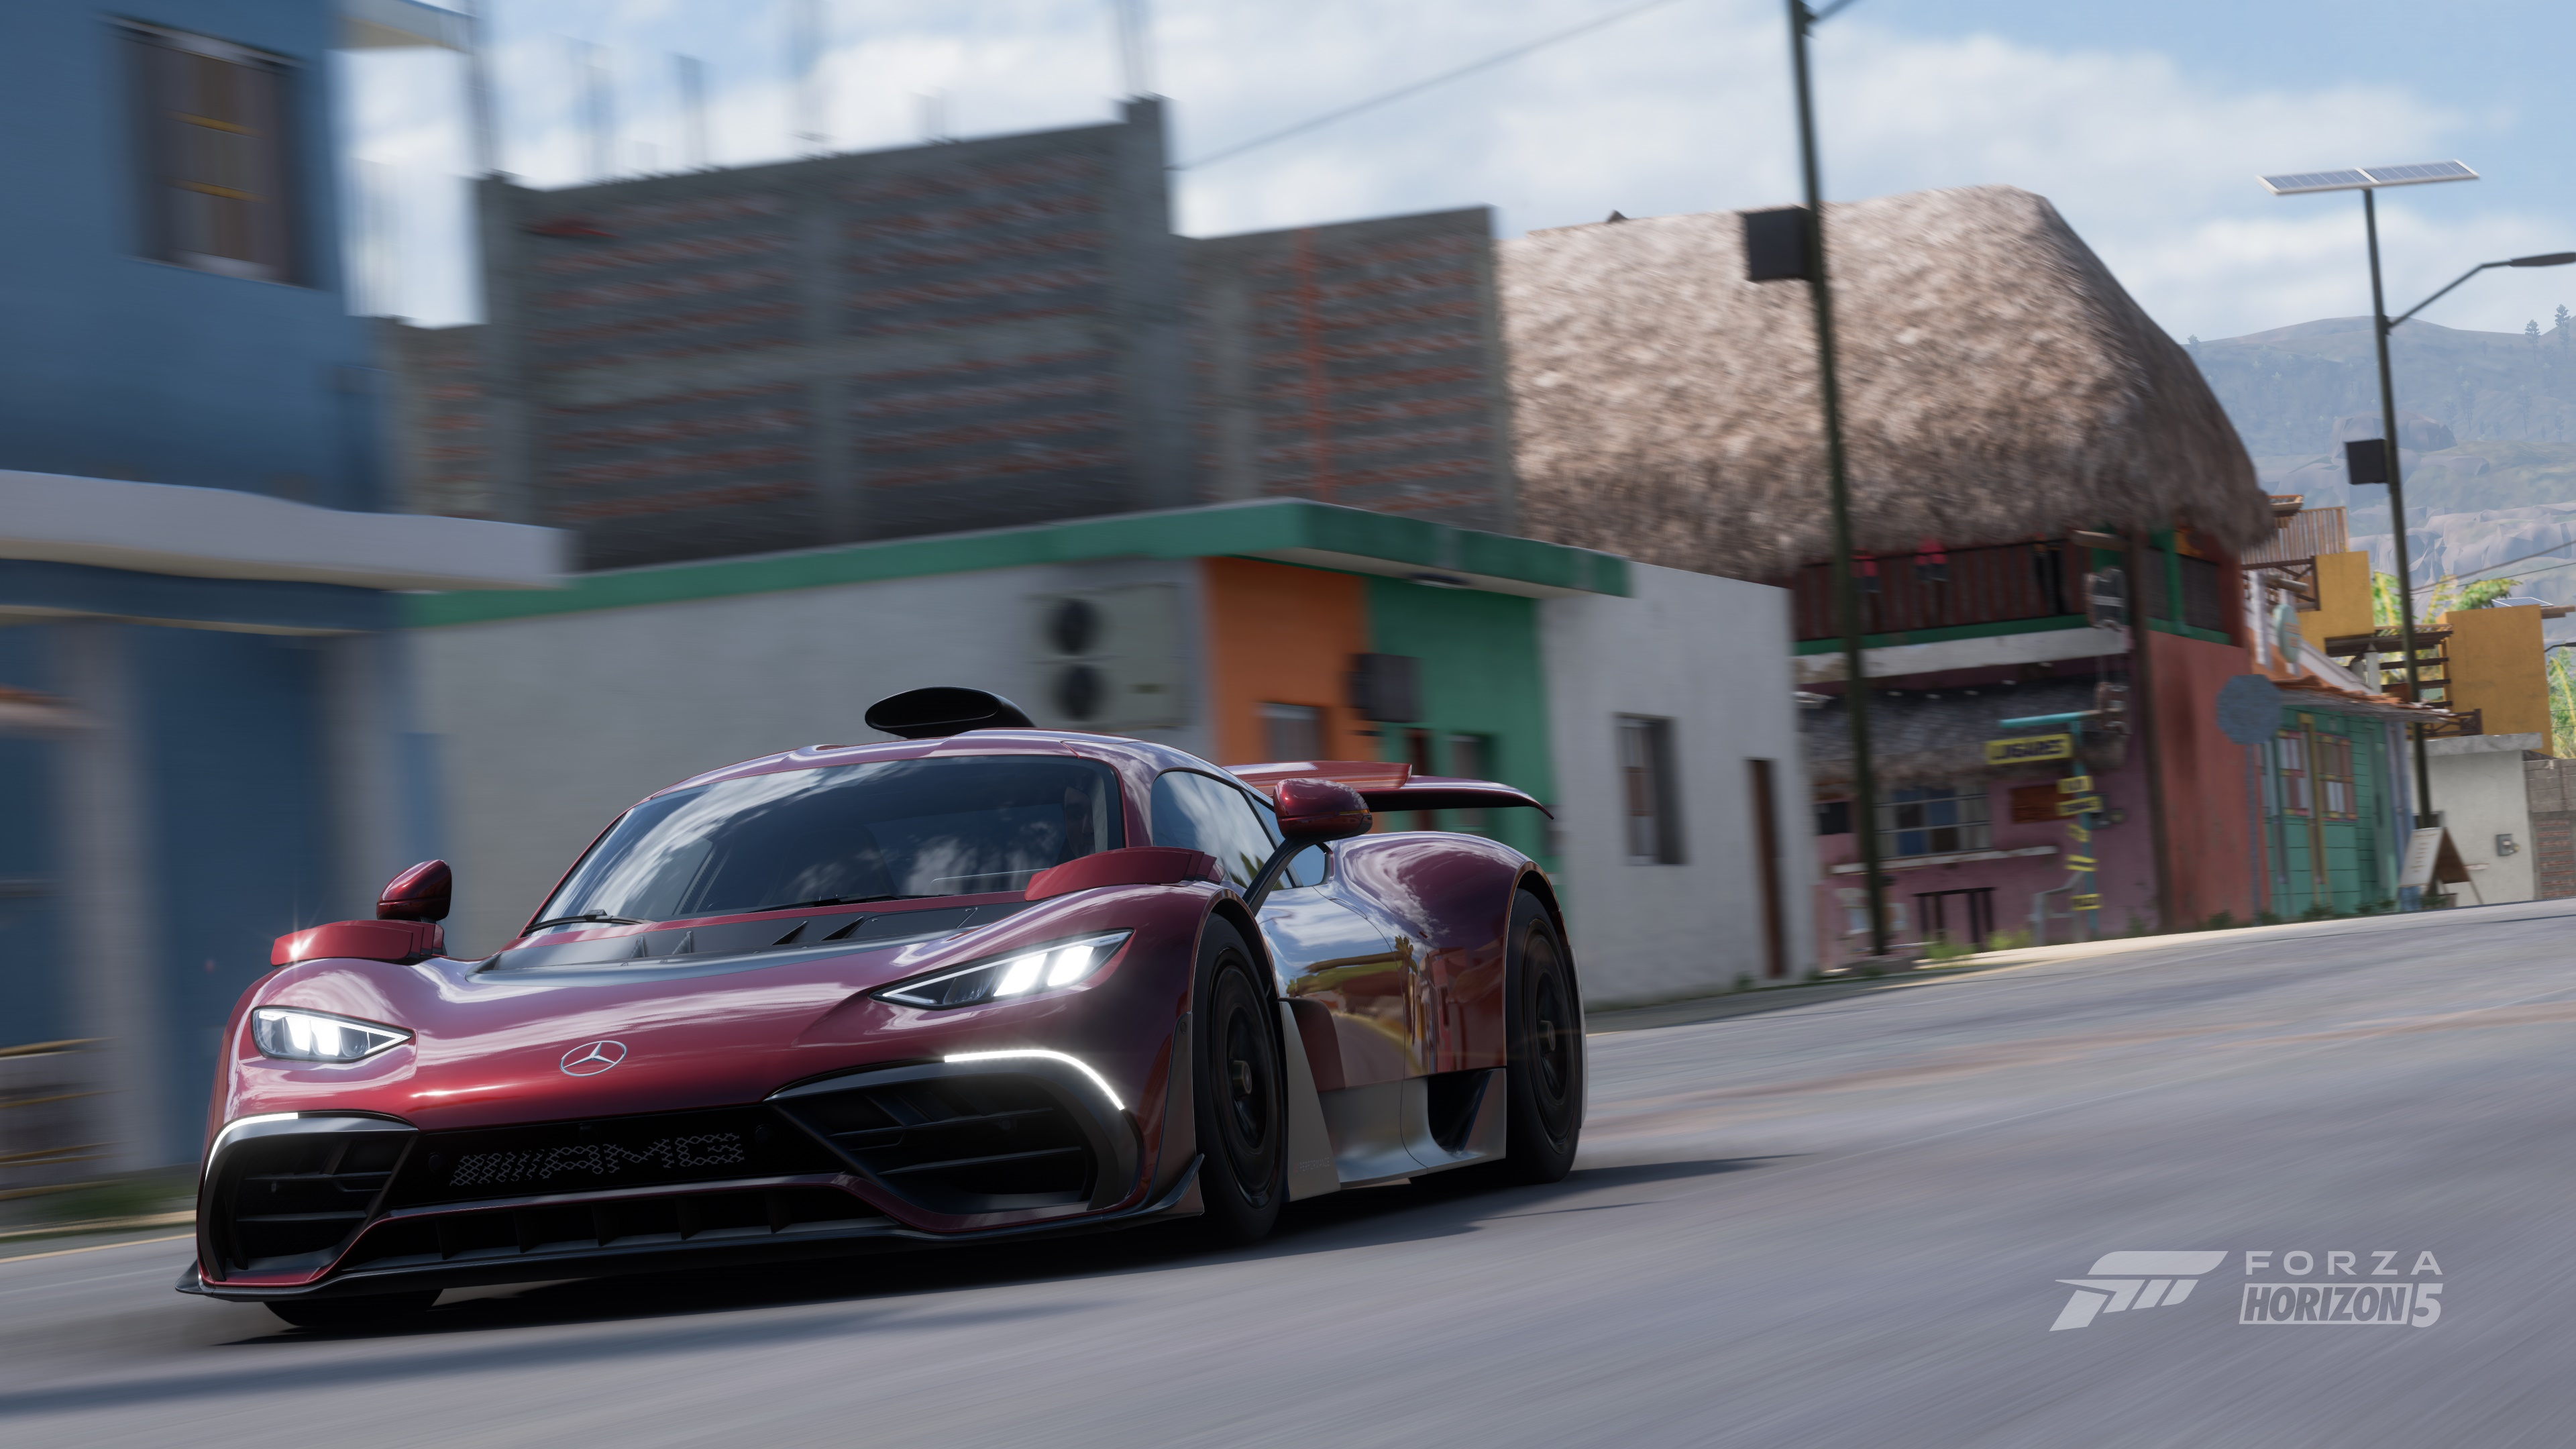 Forza Horizon 5 is now the highest-rated new game of the year